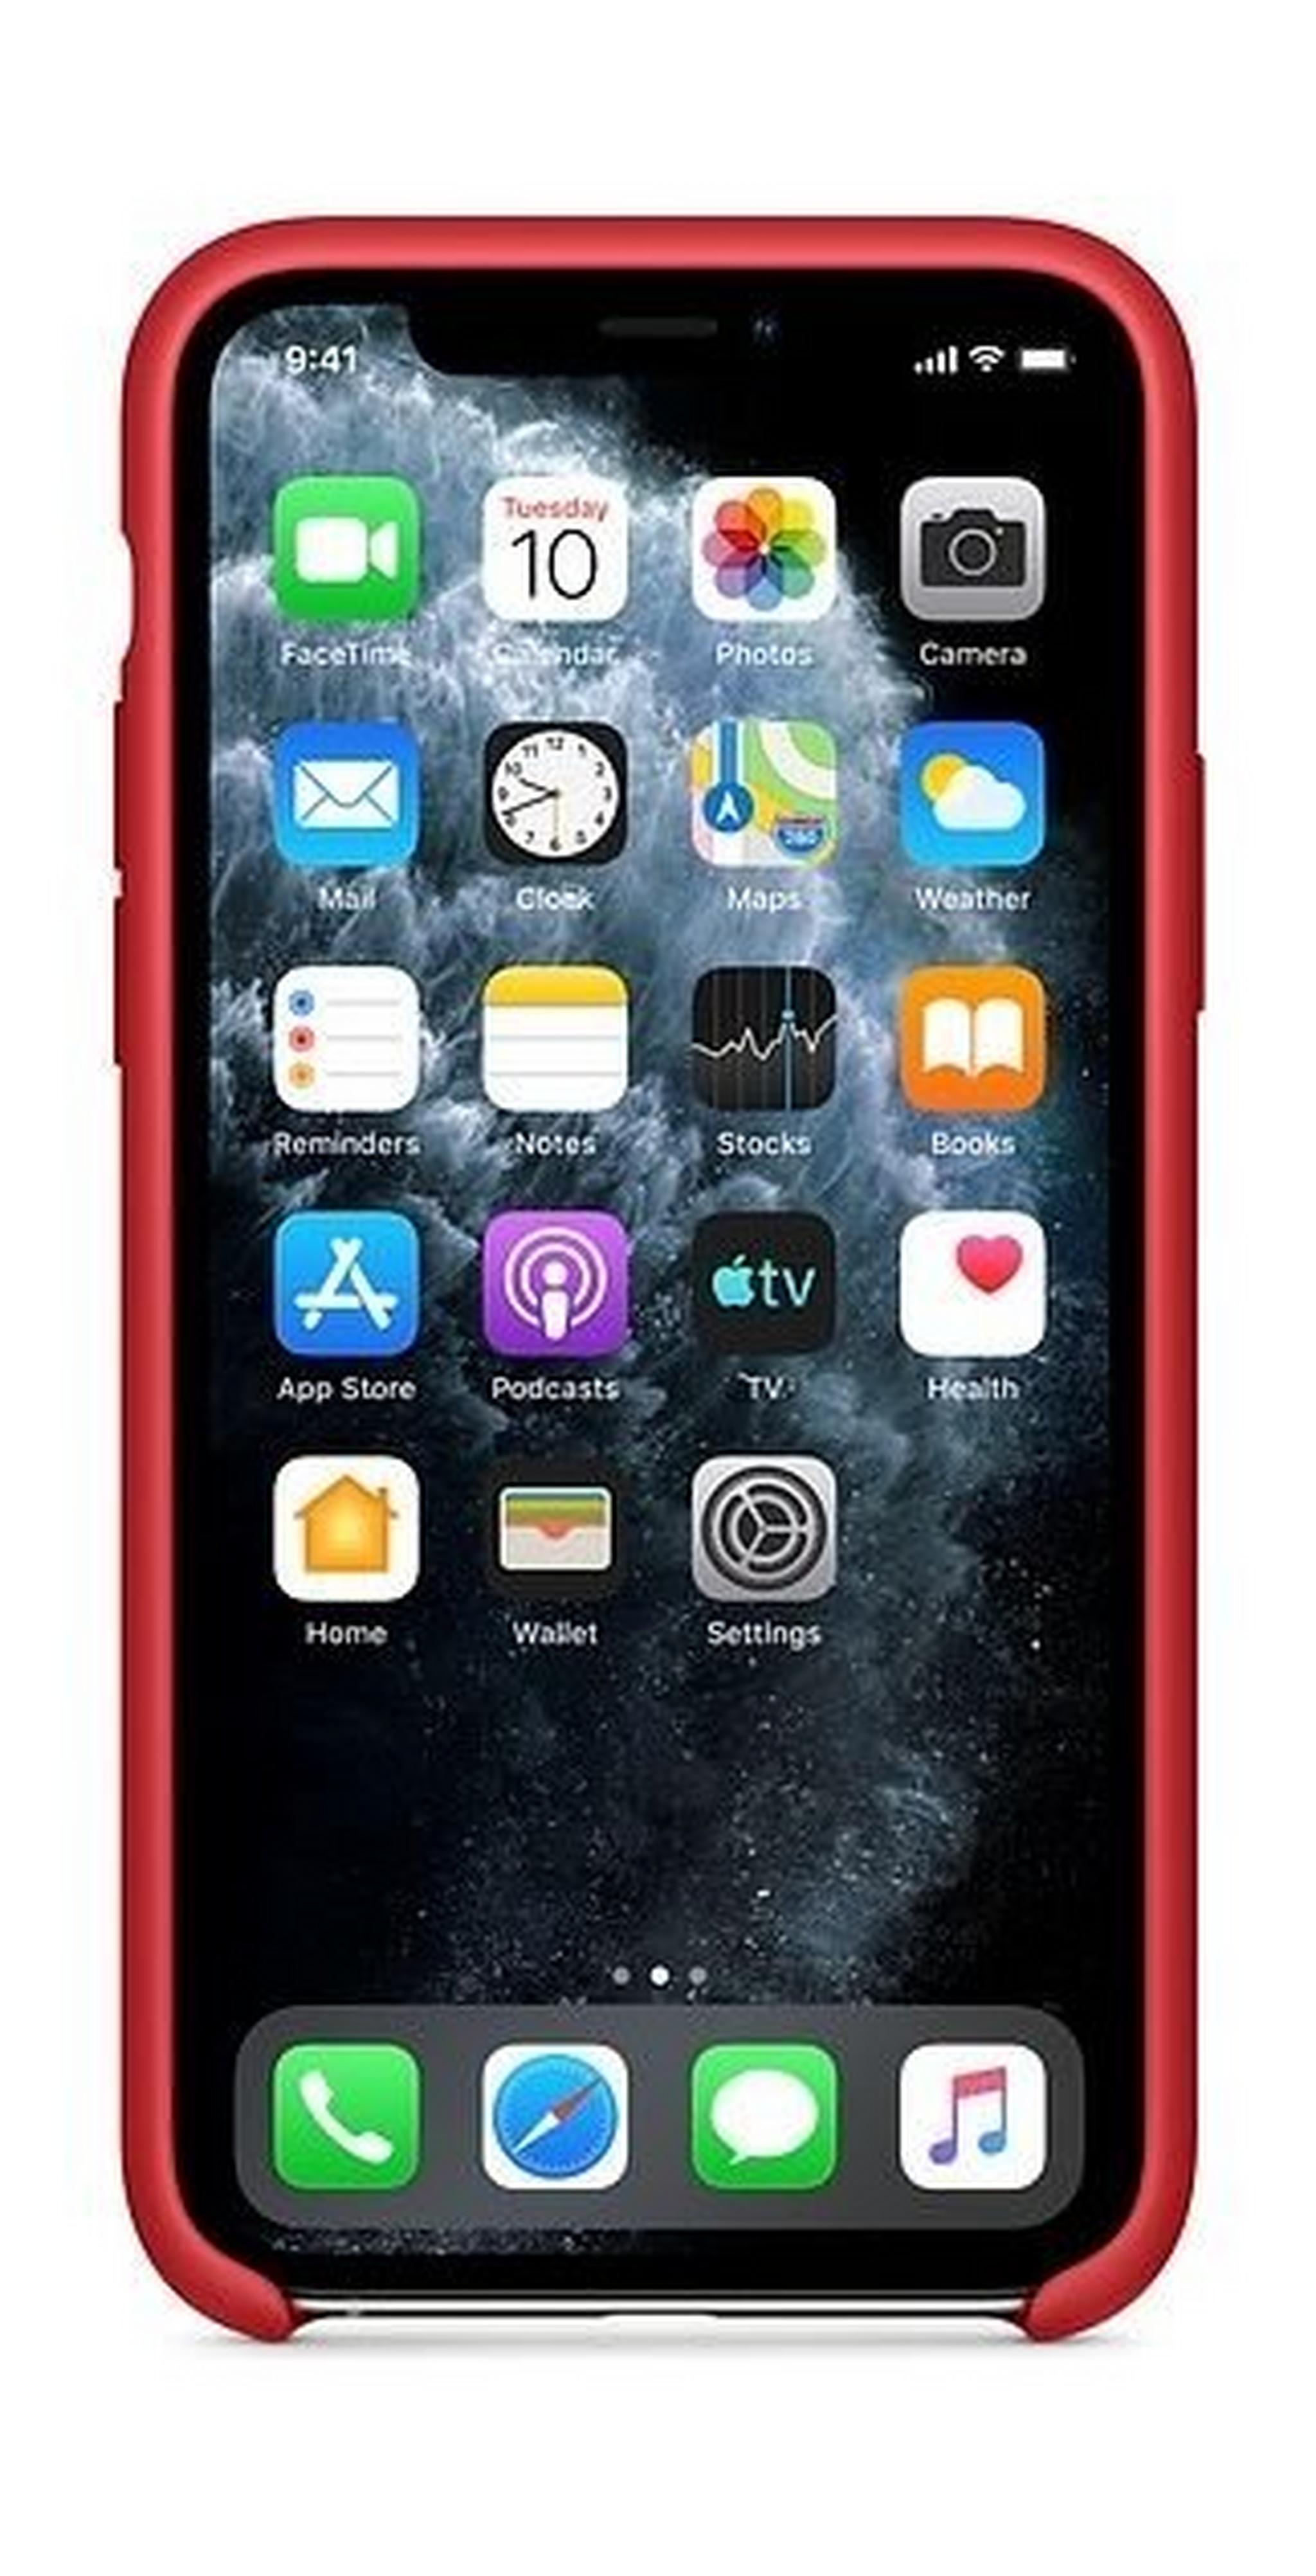 Apple iPhone 11 Pro Silicone Case - Red